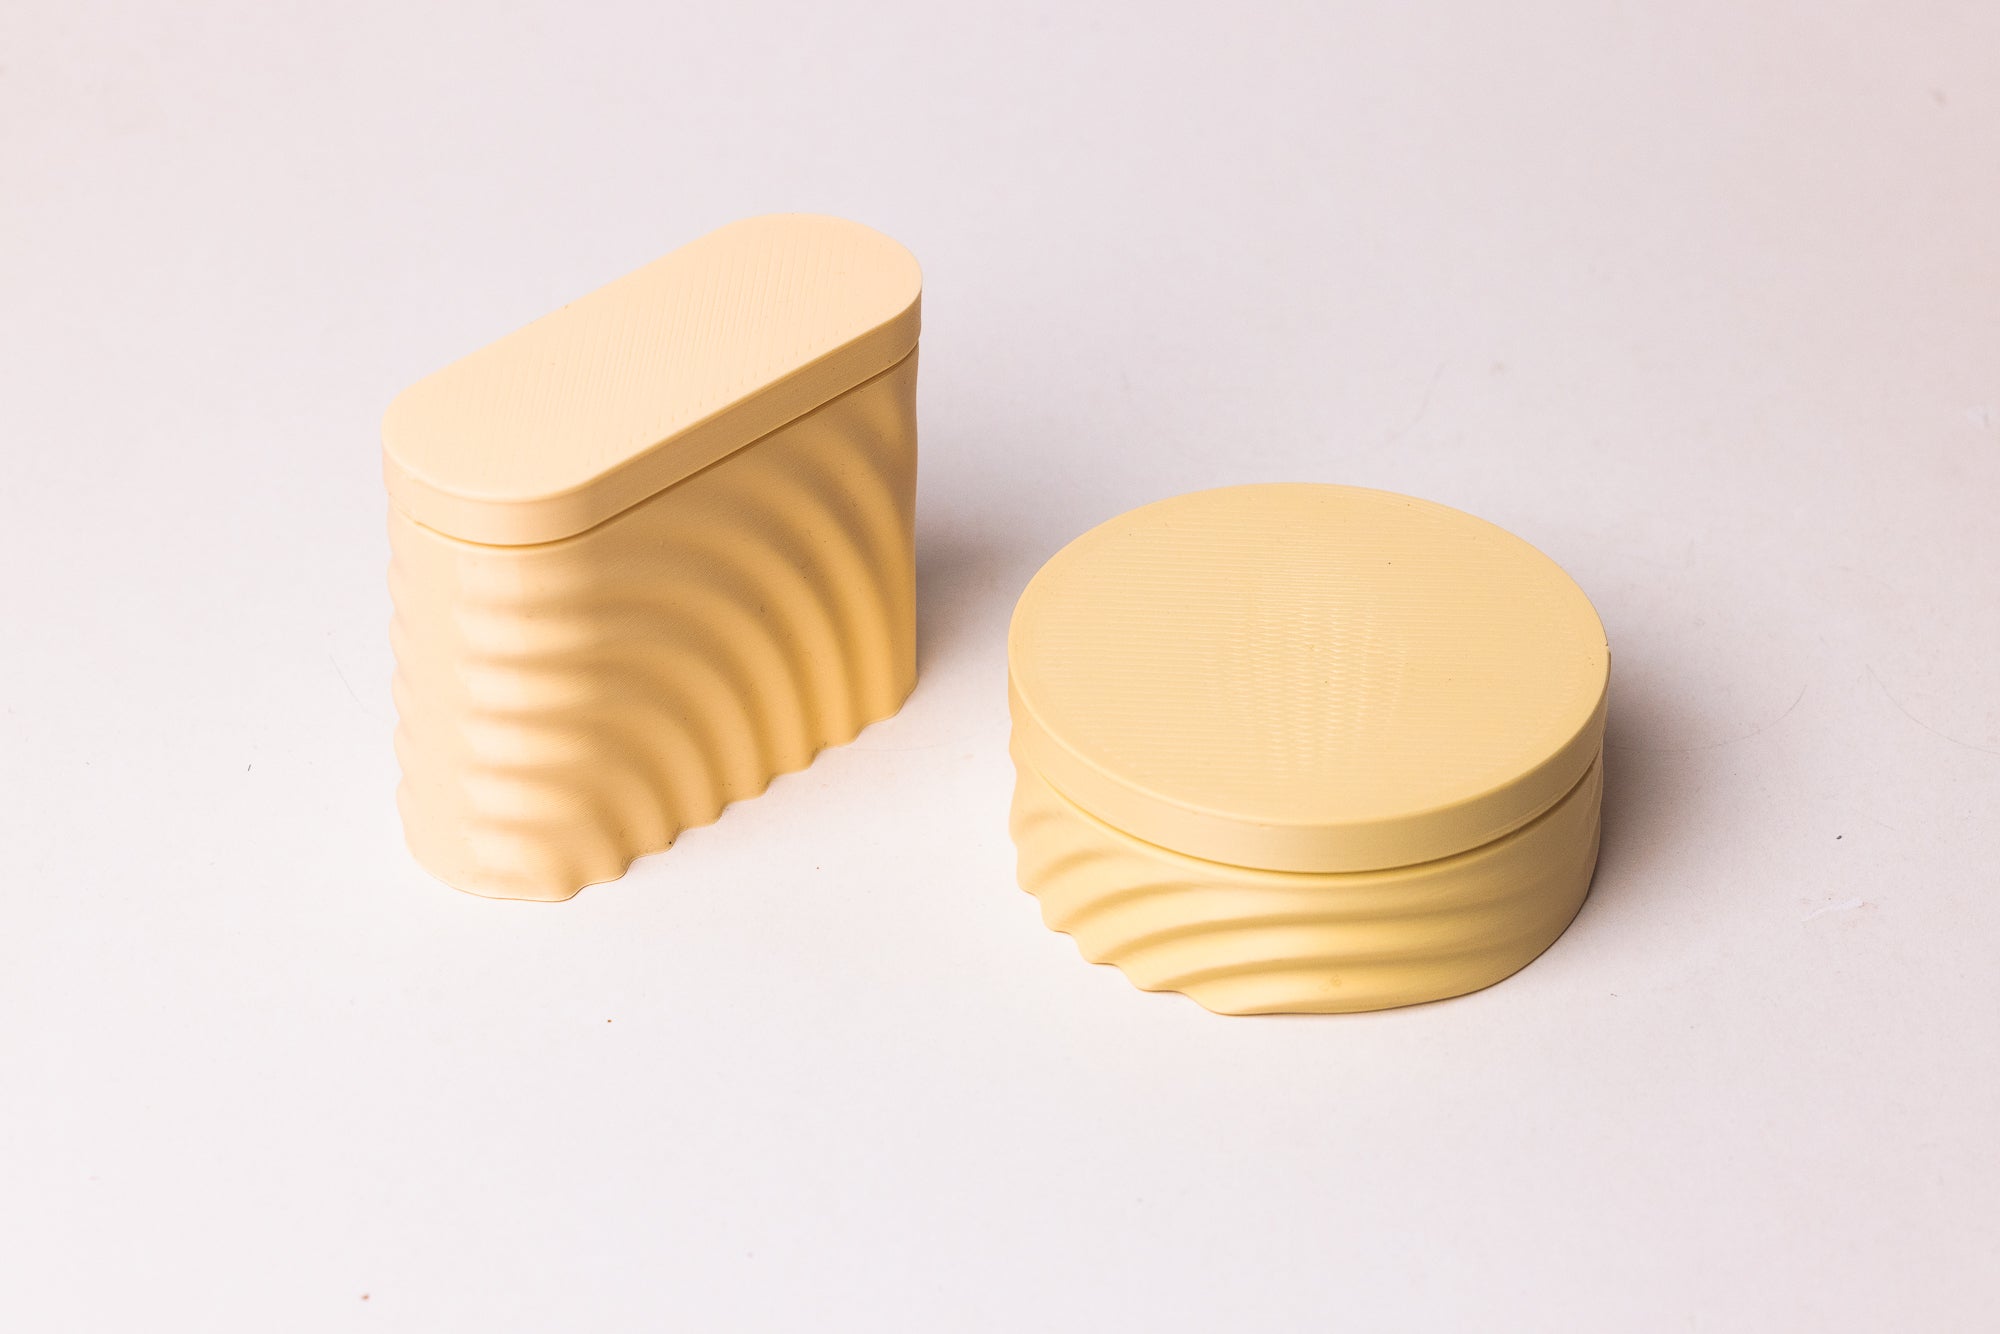 Duo of Transport Boxes for Soap and Small Objects - Pastel